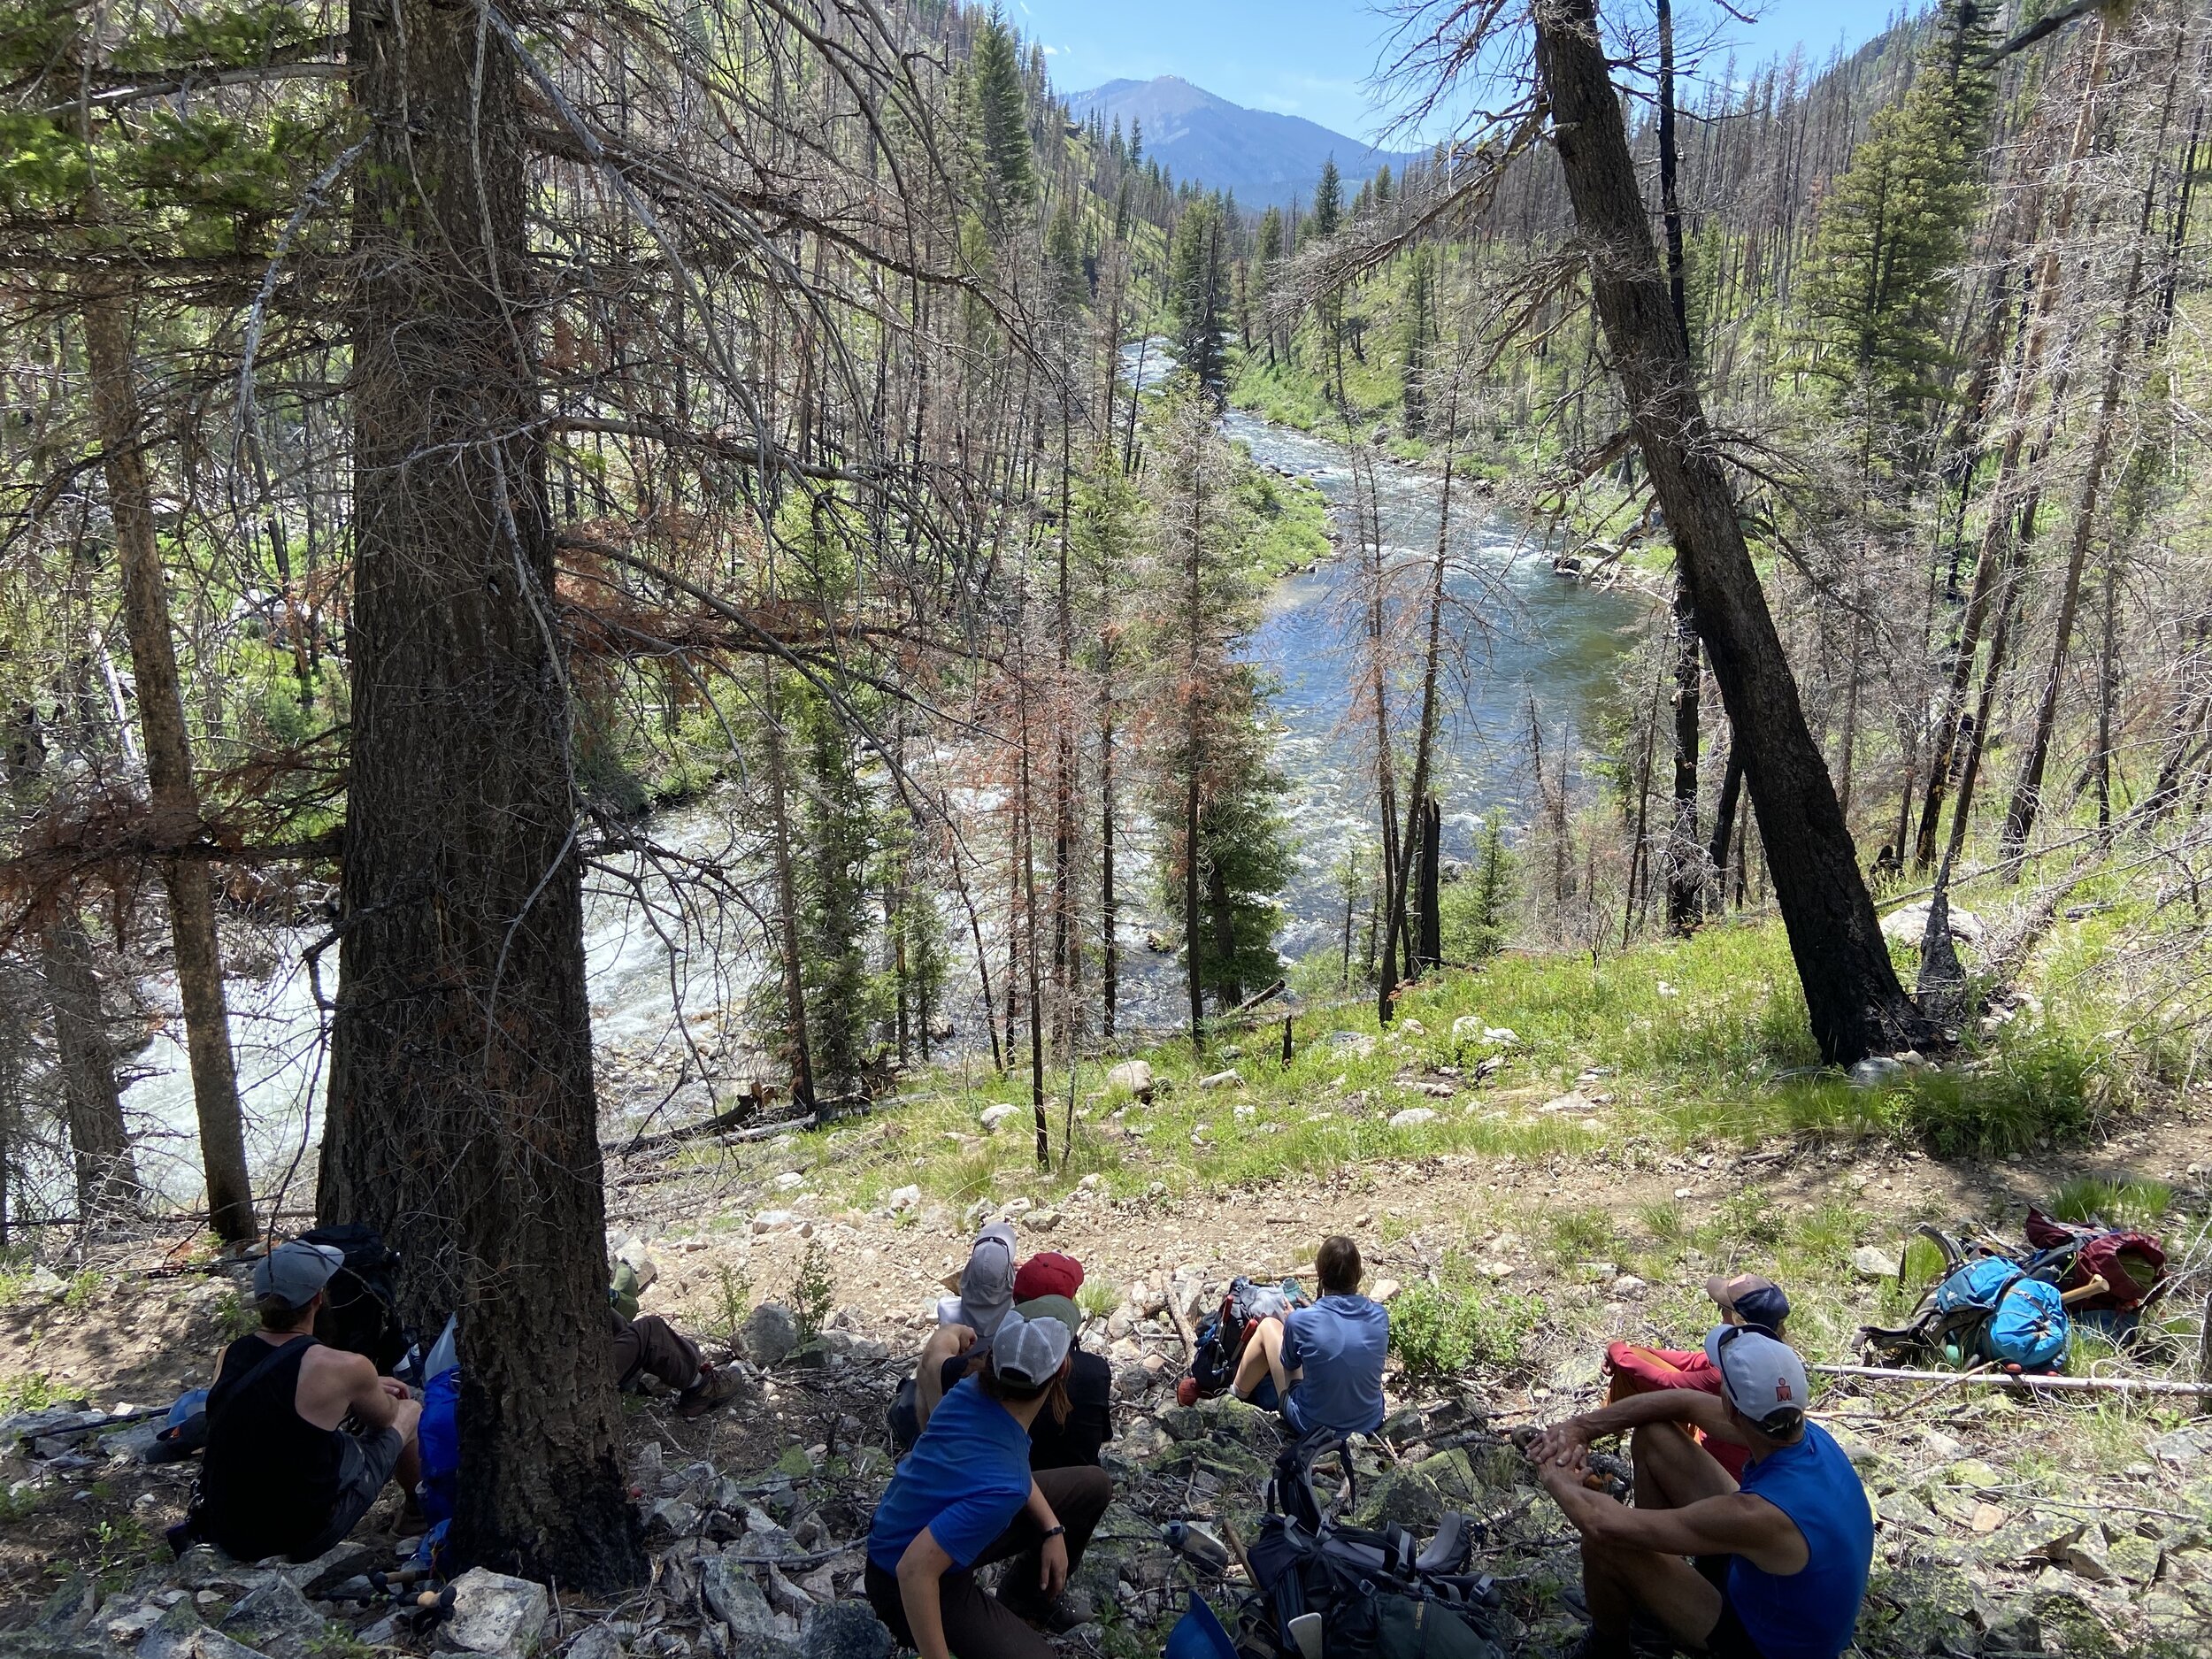 Volunteers and SBFC crew members stop for a lunch break overlooking Velvet Falls on the Middle Fork of the Salmon River.